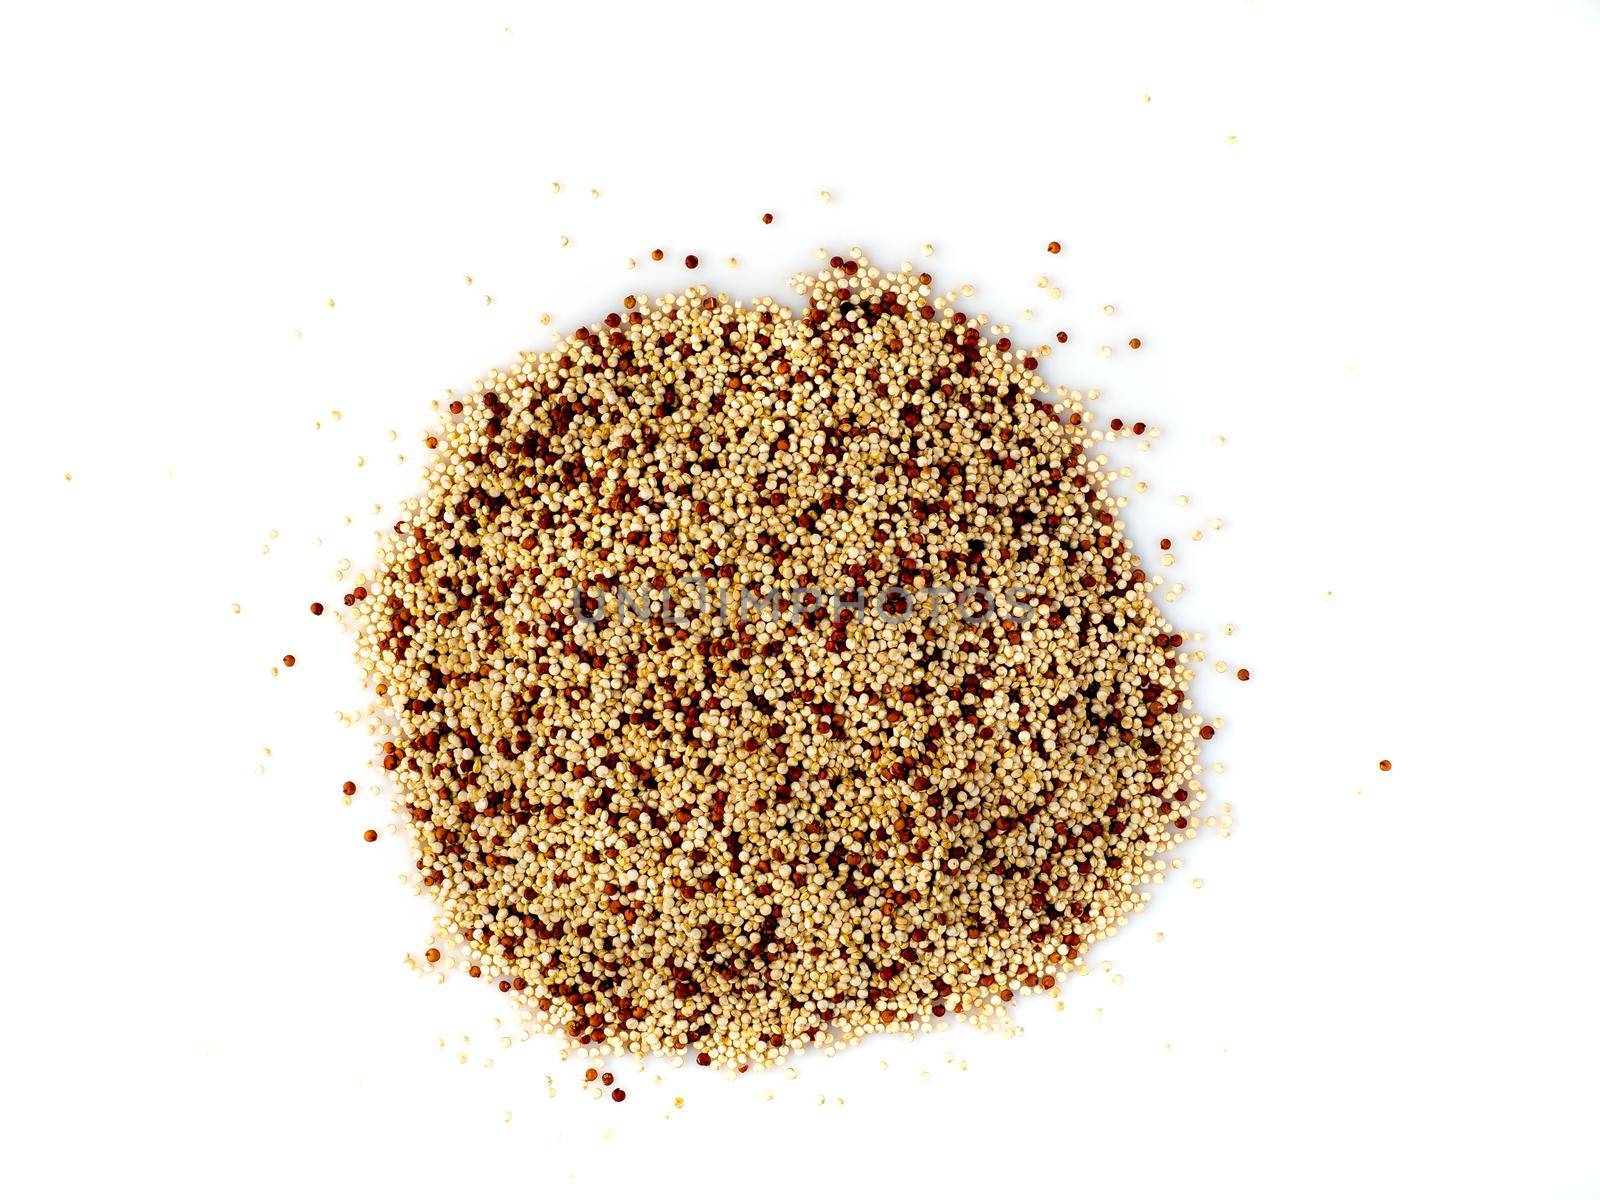 Raw quinoa seeds isolated on white background, top view, close-up by NataBene